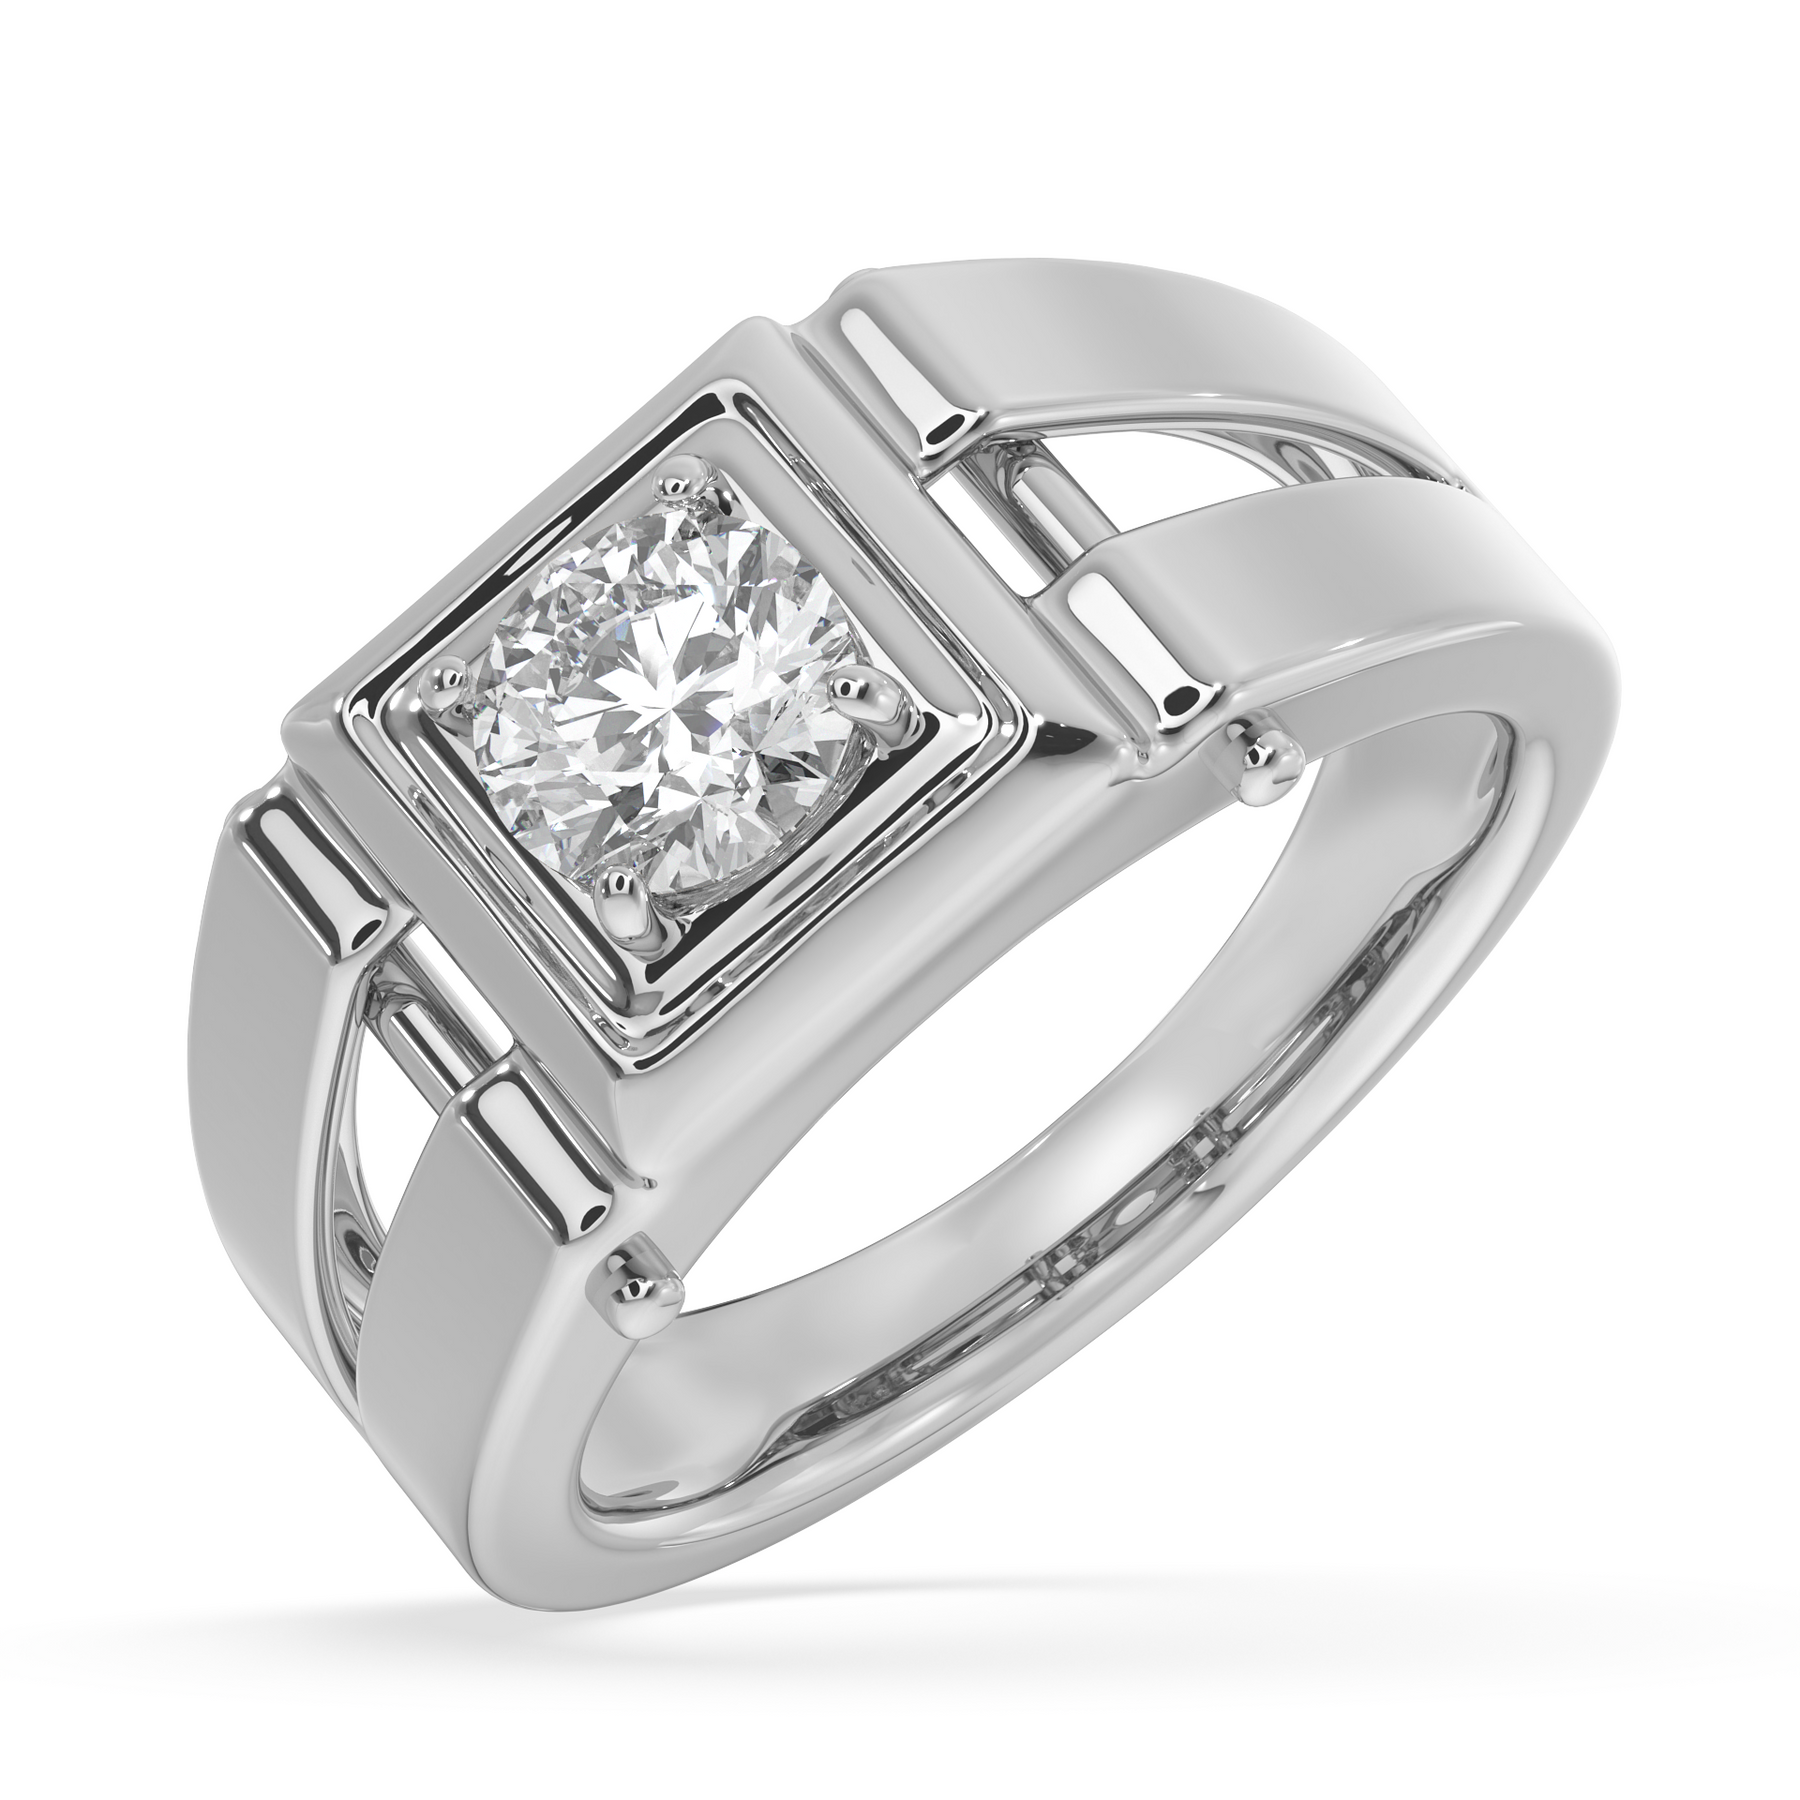 Buy Platinum Plated Elegant CZ Couple Adjustable Solitaire Ring for Men and  Women online from Karat Cart